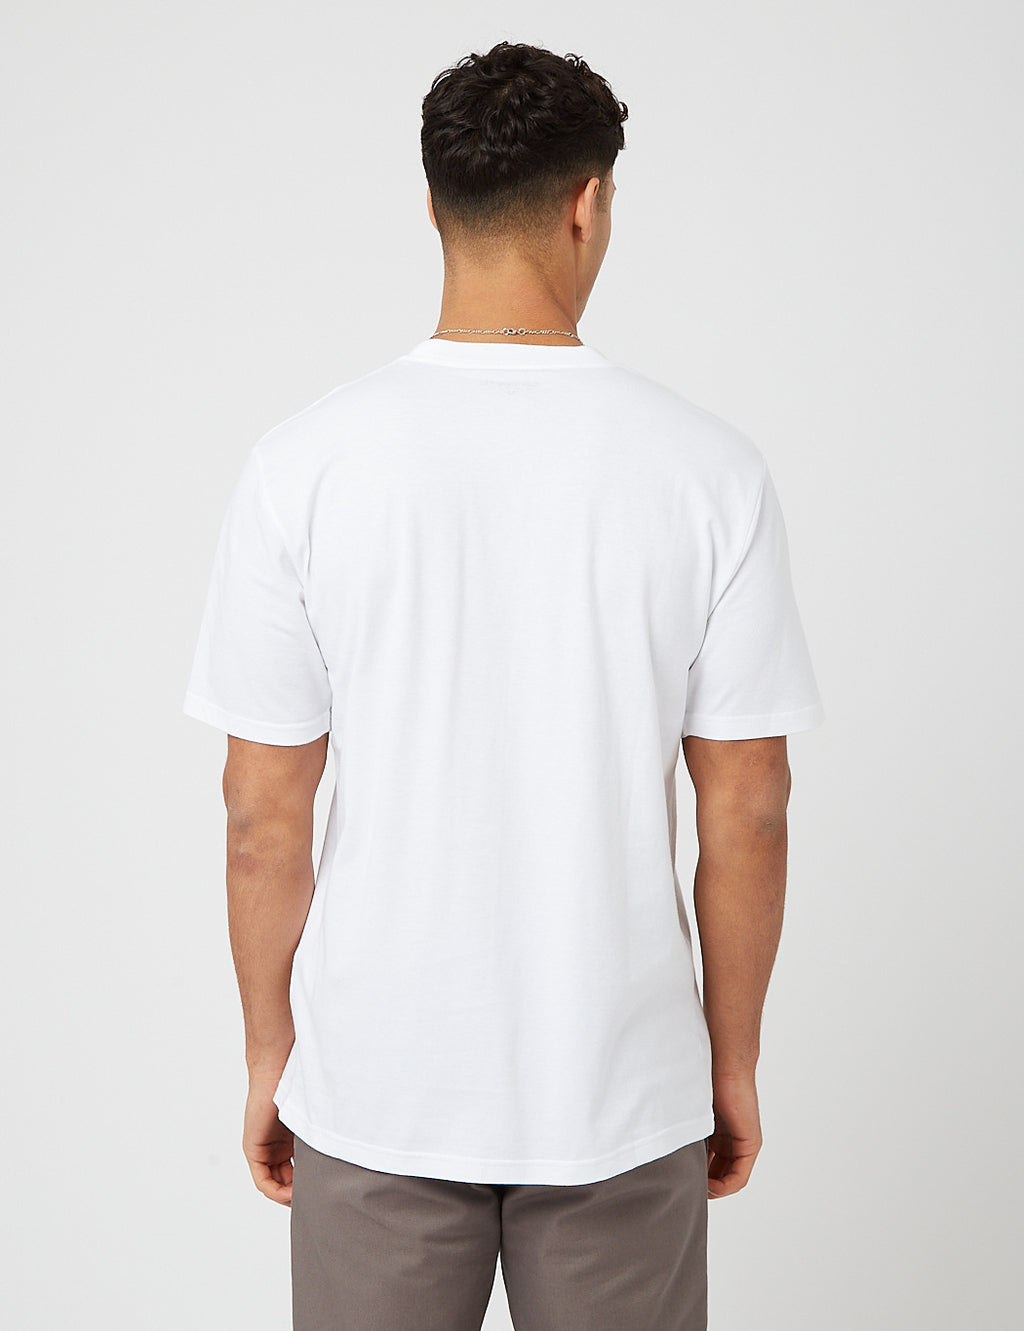 Carhartt-WIP 313 Duckdivision T-Shirt - White I URBAN EXCESS.